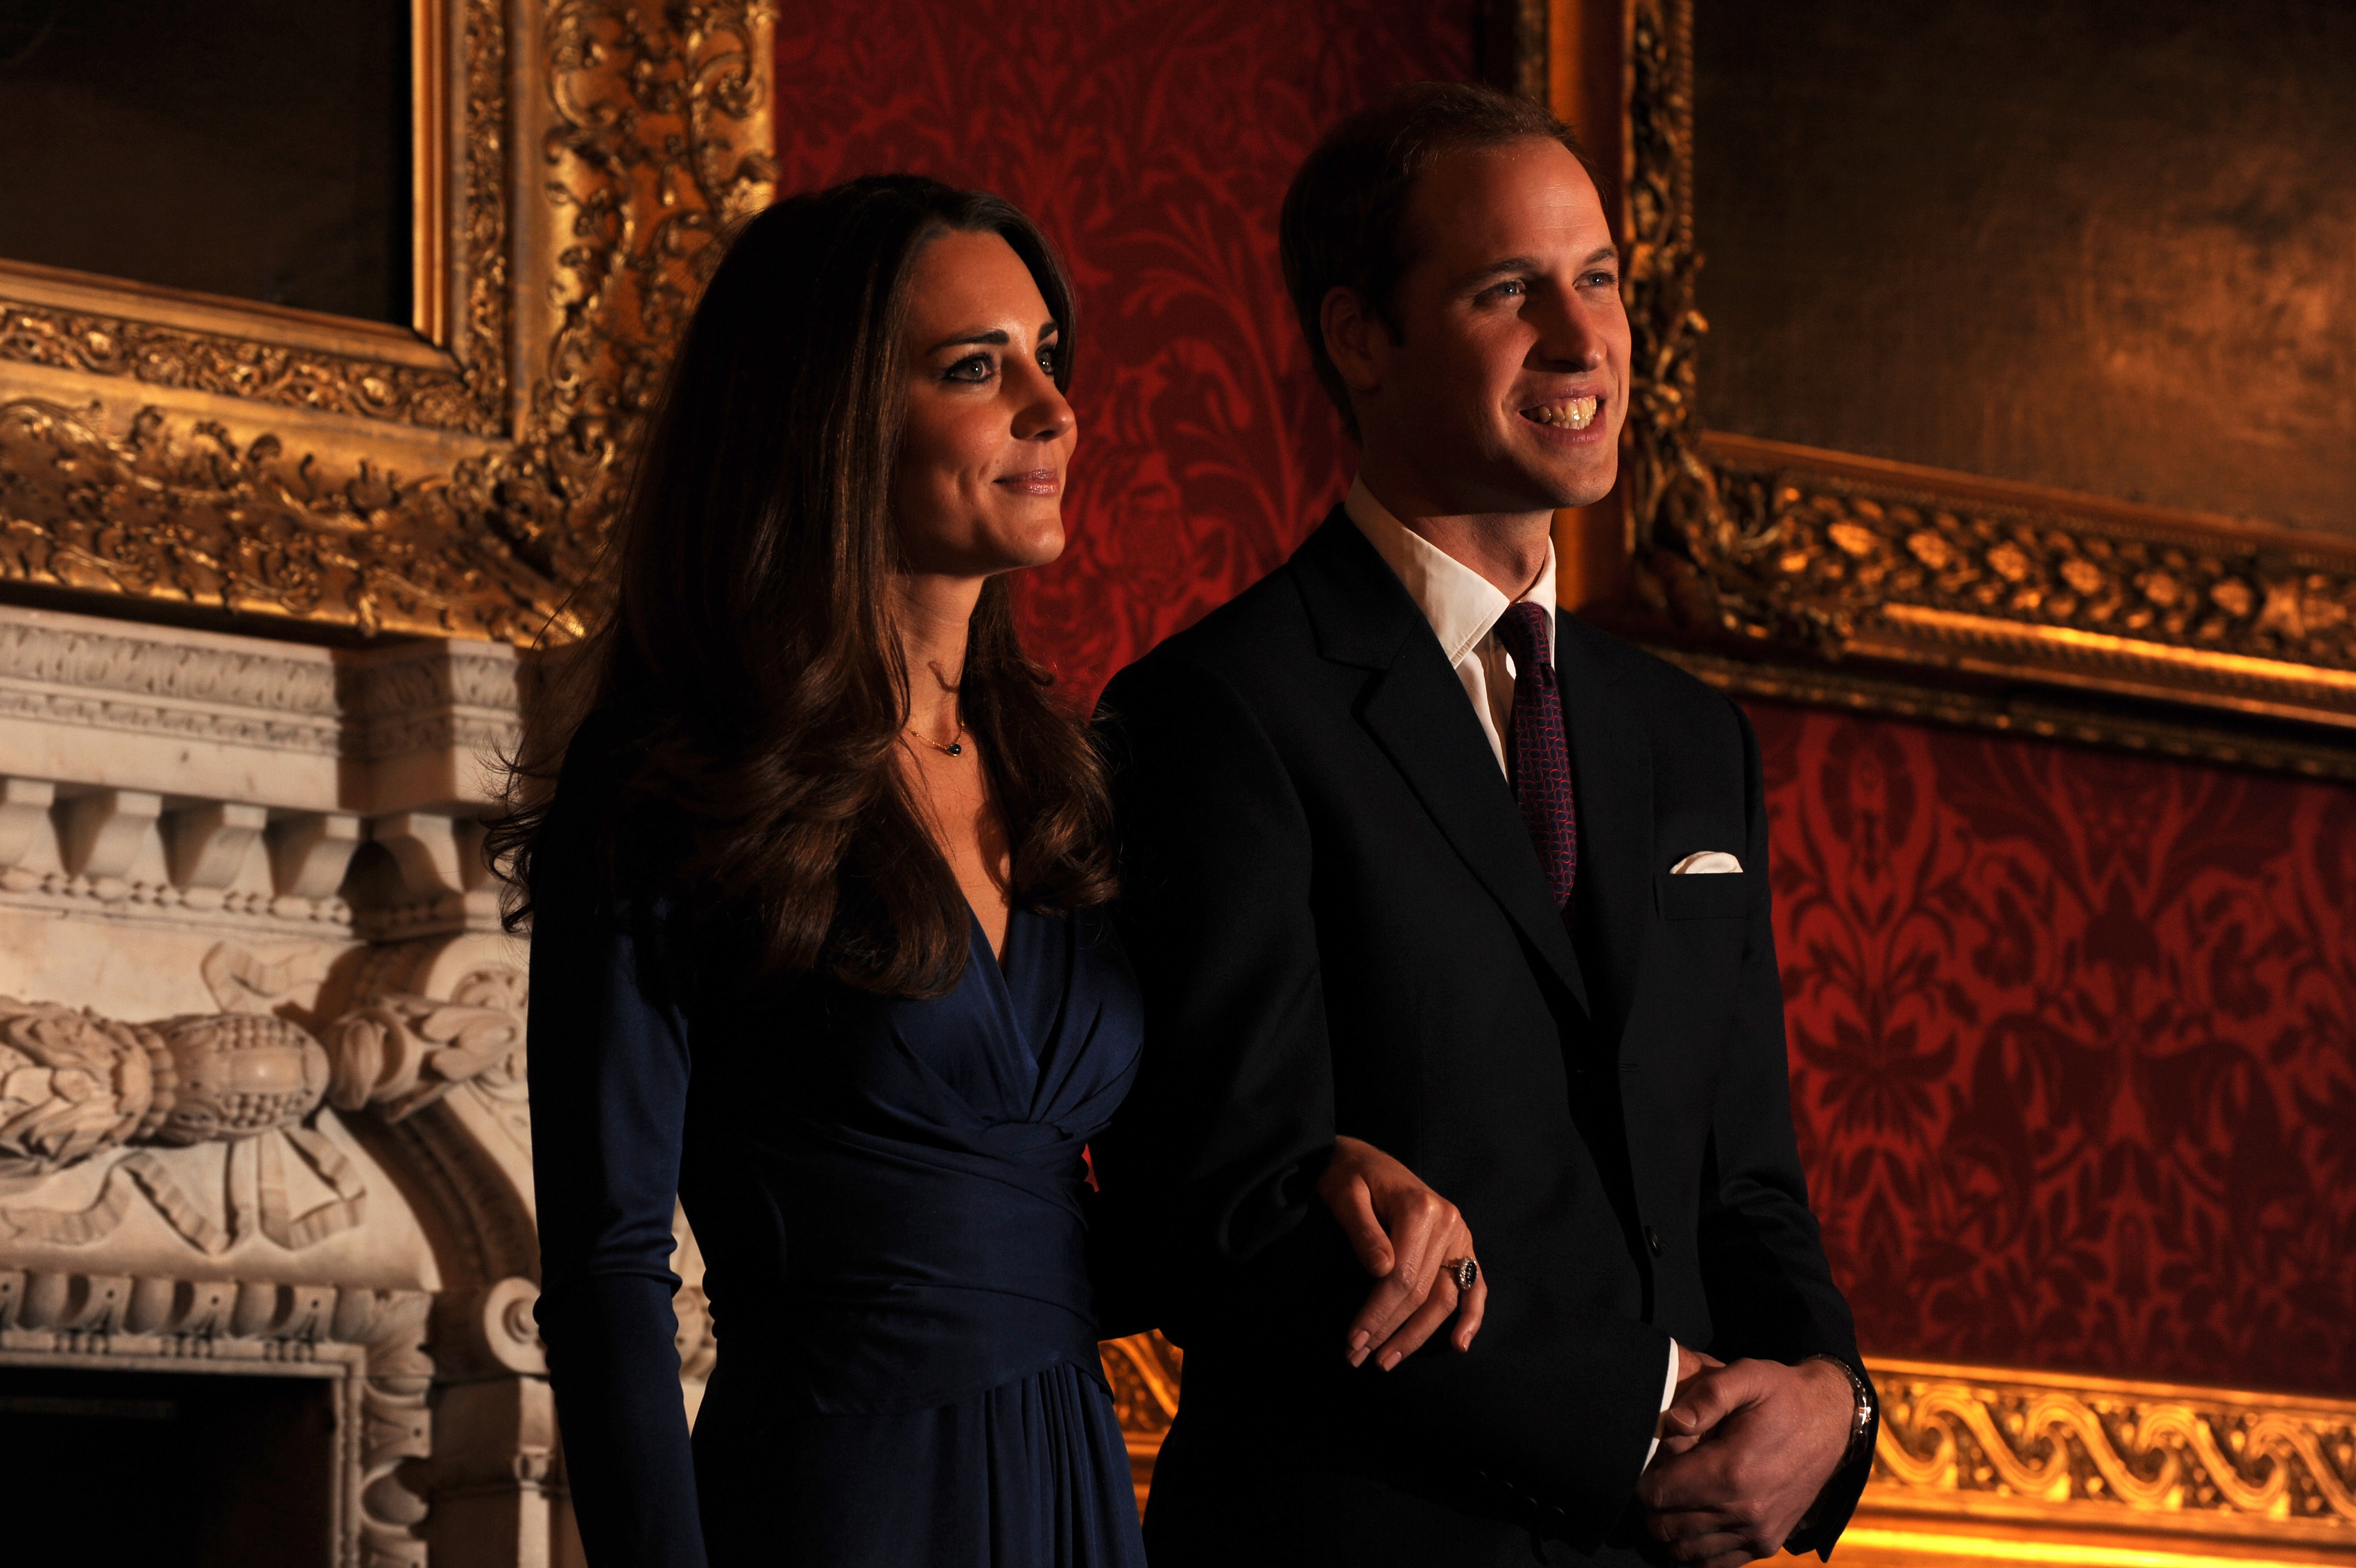 Middleton and Prince William pose for photographers during a photocall to mark their engagement in the State Rooms of St James' Palace on November 16, 2010 in London. | Source: Getty Images